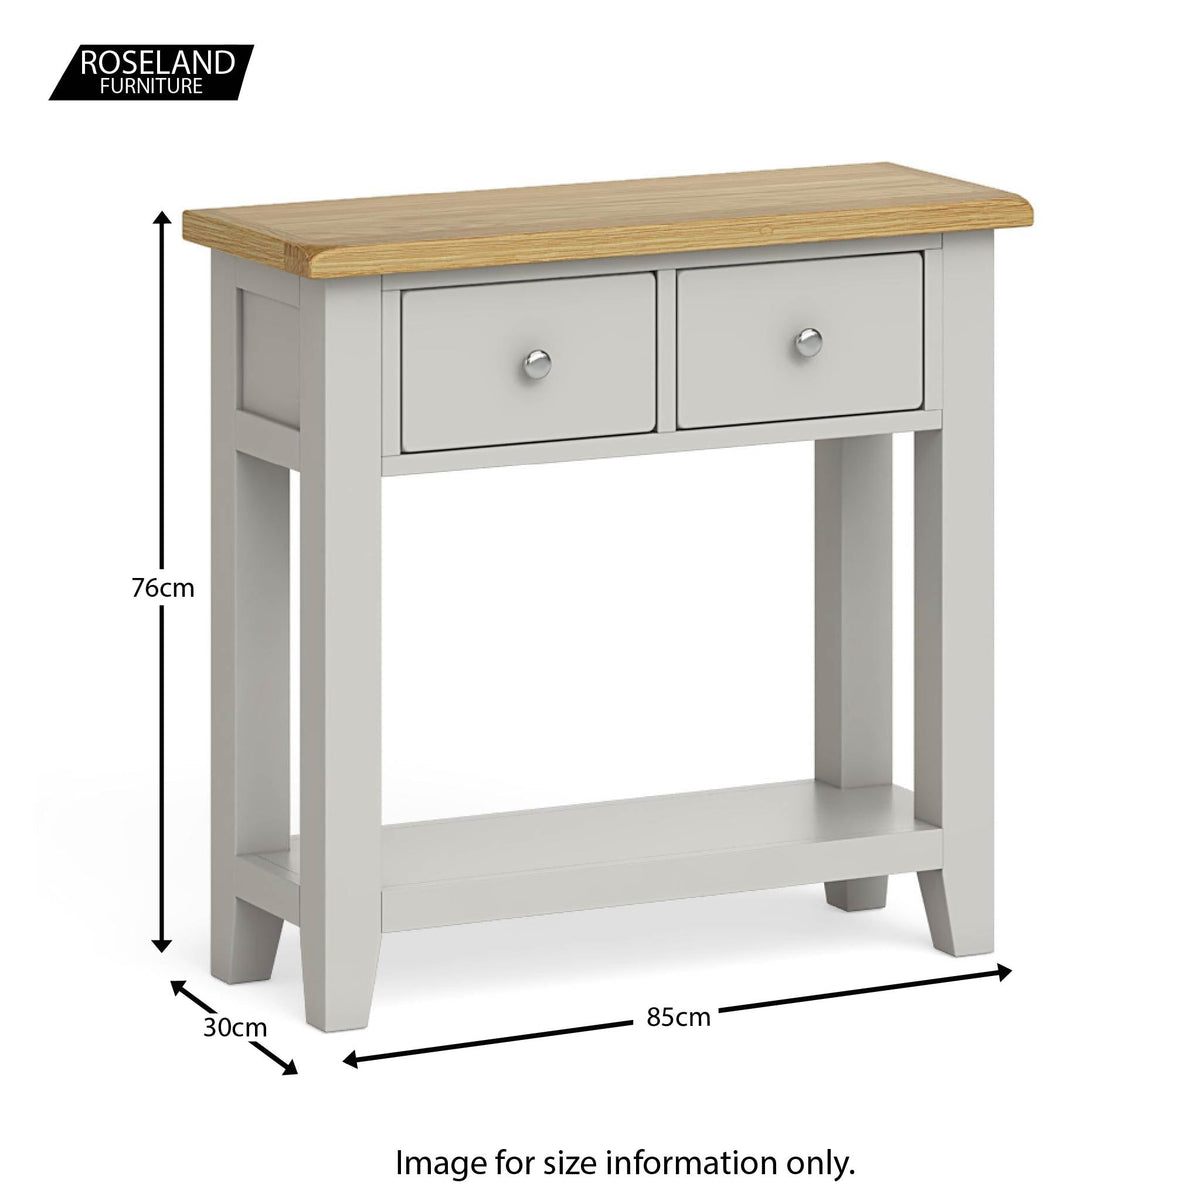 Dimensions - Lundy Grey Console Table